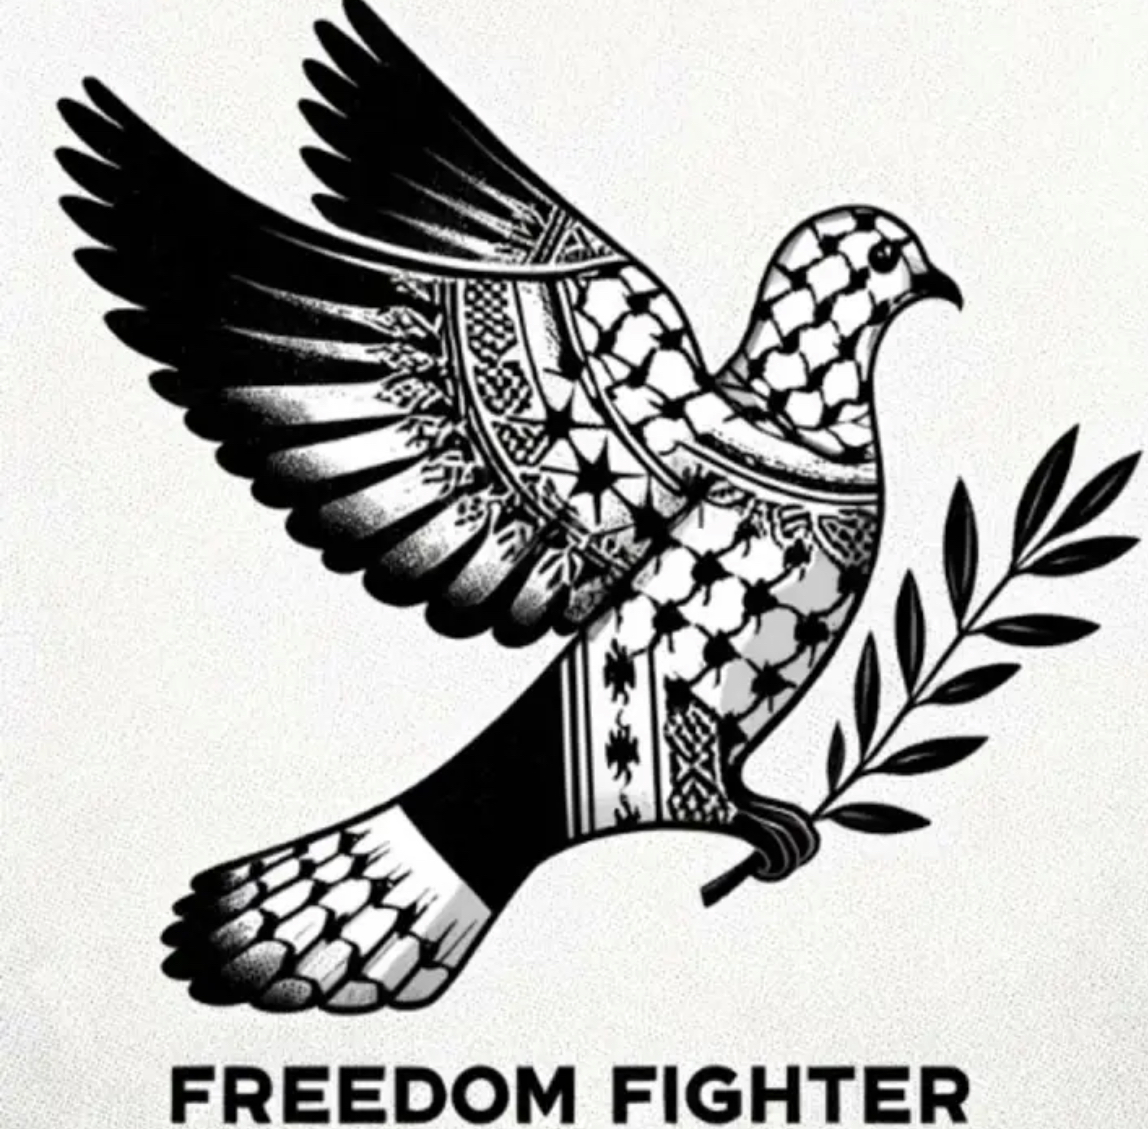 2 Swift Returns with a Message: ‘Freedom Fighter’ Tackles the Urgency of Our Times